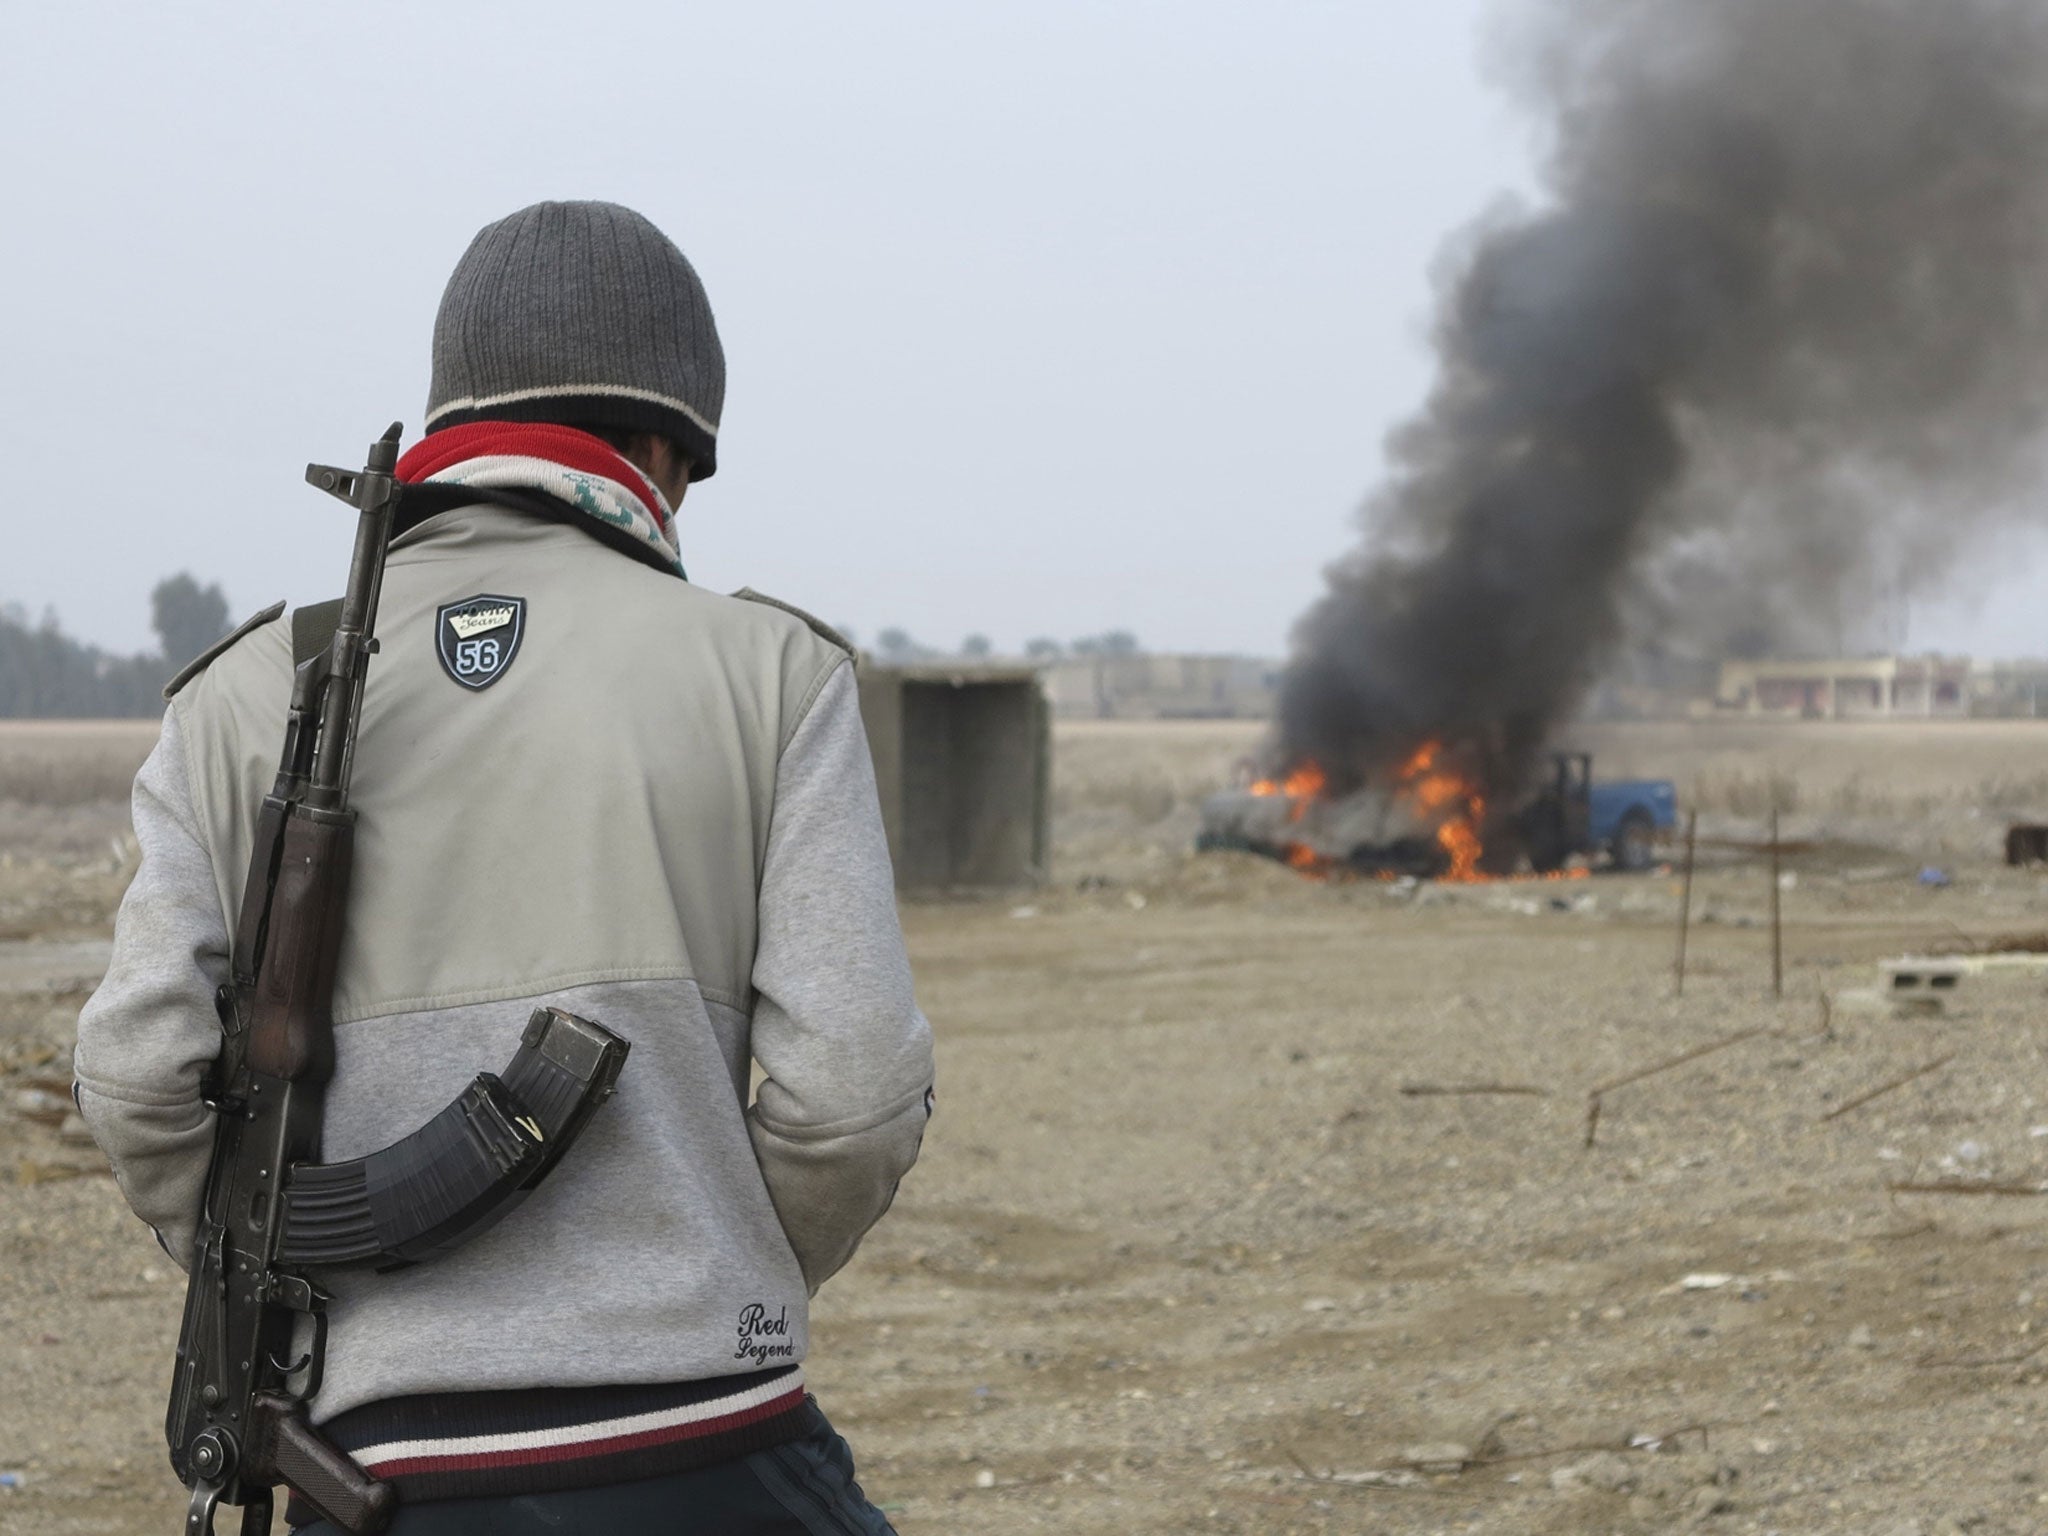 A Sunni Muslim fighter looks at a burning police vehicle during clashes in Ramadi